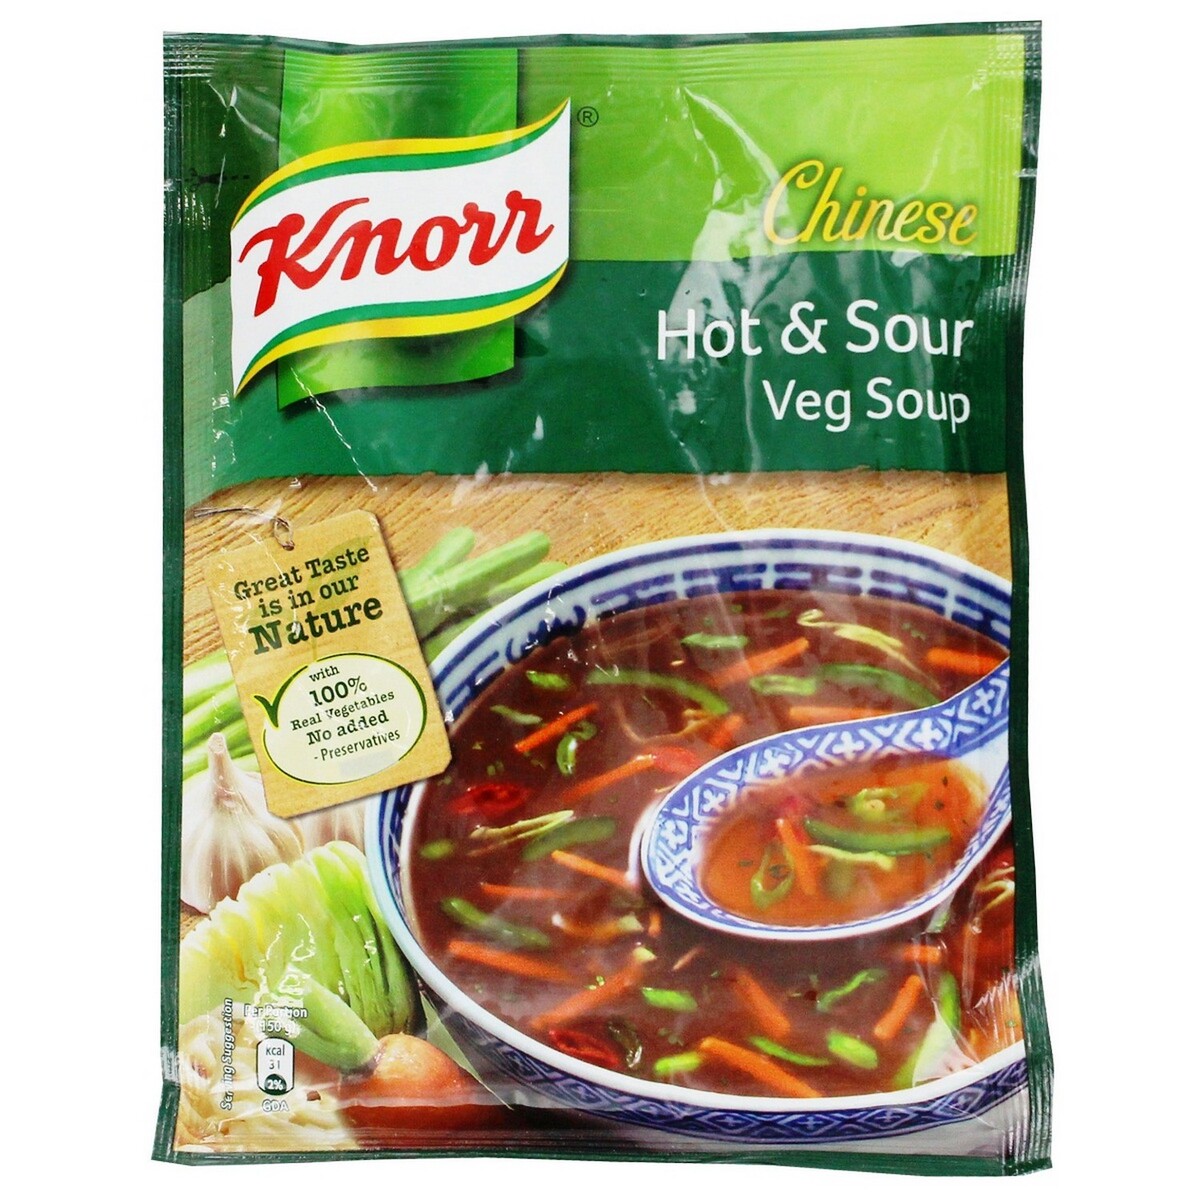 Knorr Chinese Hot & Sour Veg Soup 43g